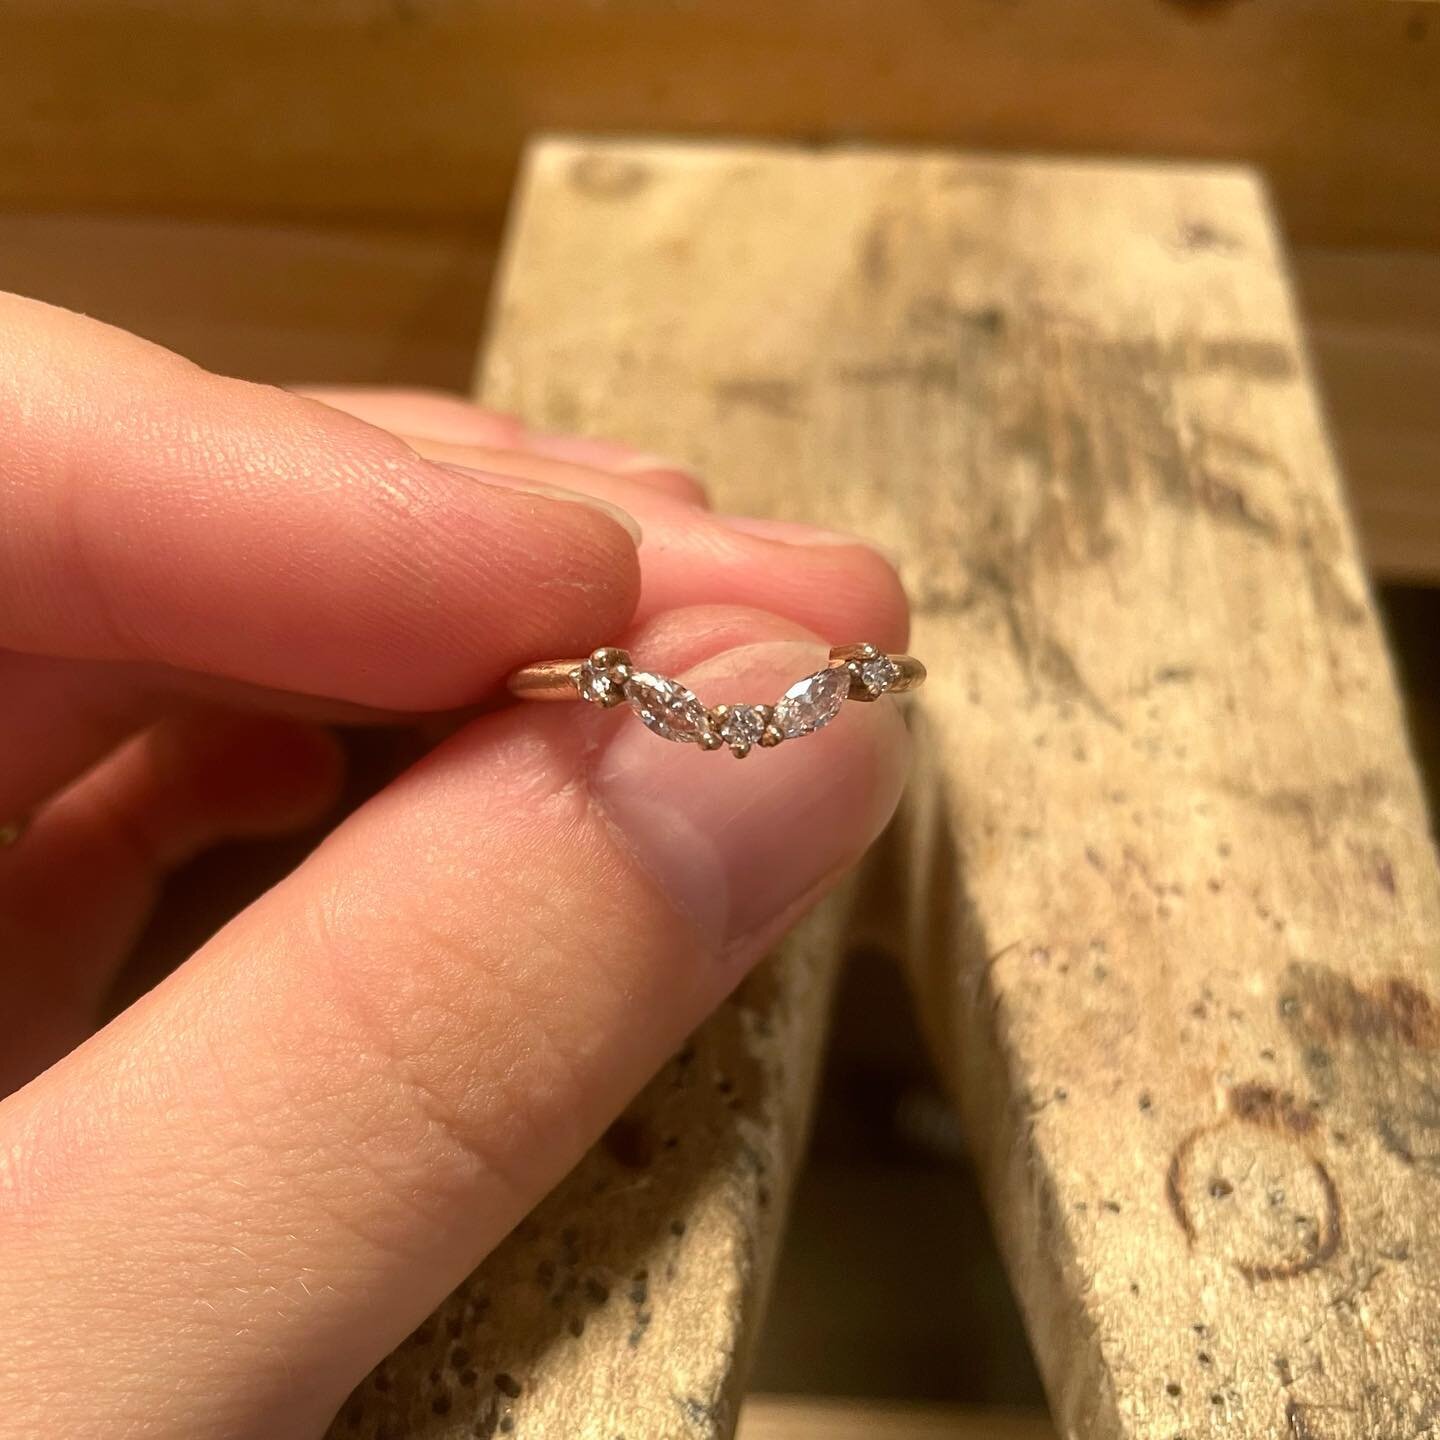 Just about done with this custom wedding band for my very own BFF. Can&rsquo;t wait to get this on your finger @alexandramasten in 29 days!!! ❤️😘
-
-
-

#instajewelry #handmadejewlery #handmadecrafts #bespokejewelry #mainemade #madeinmaine #shopsmal